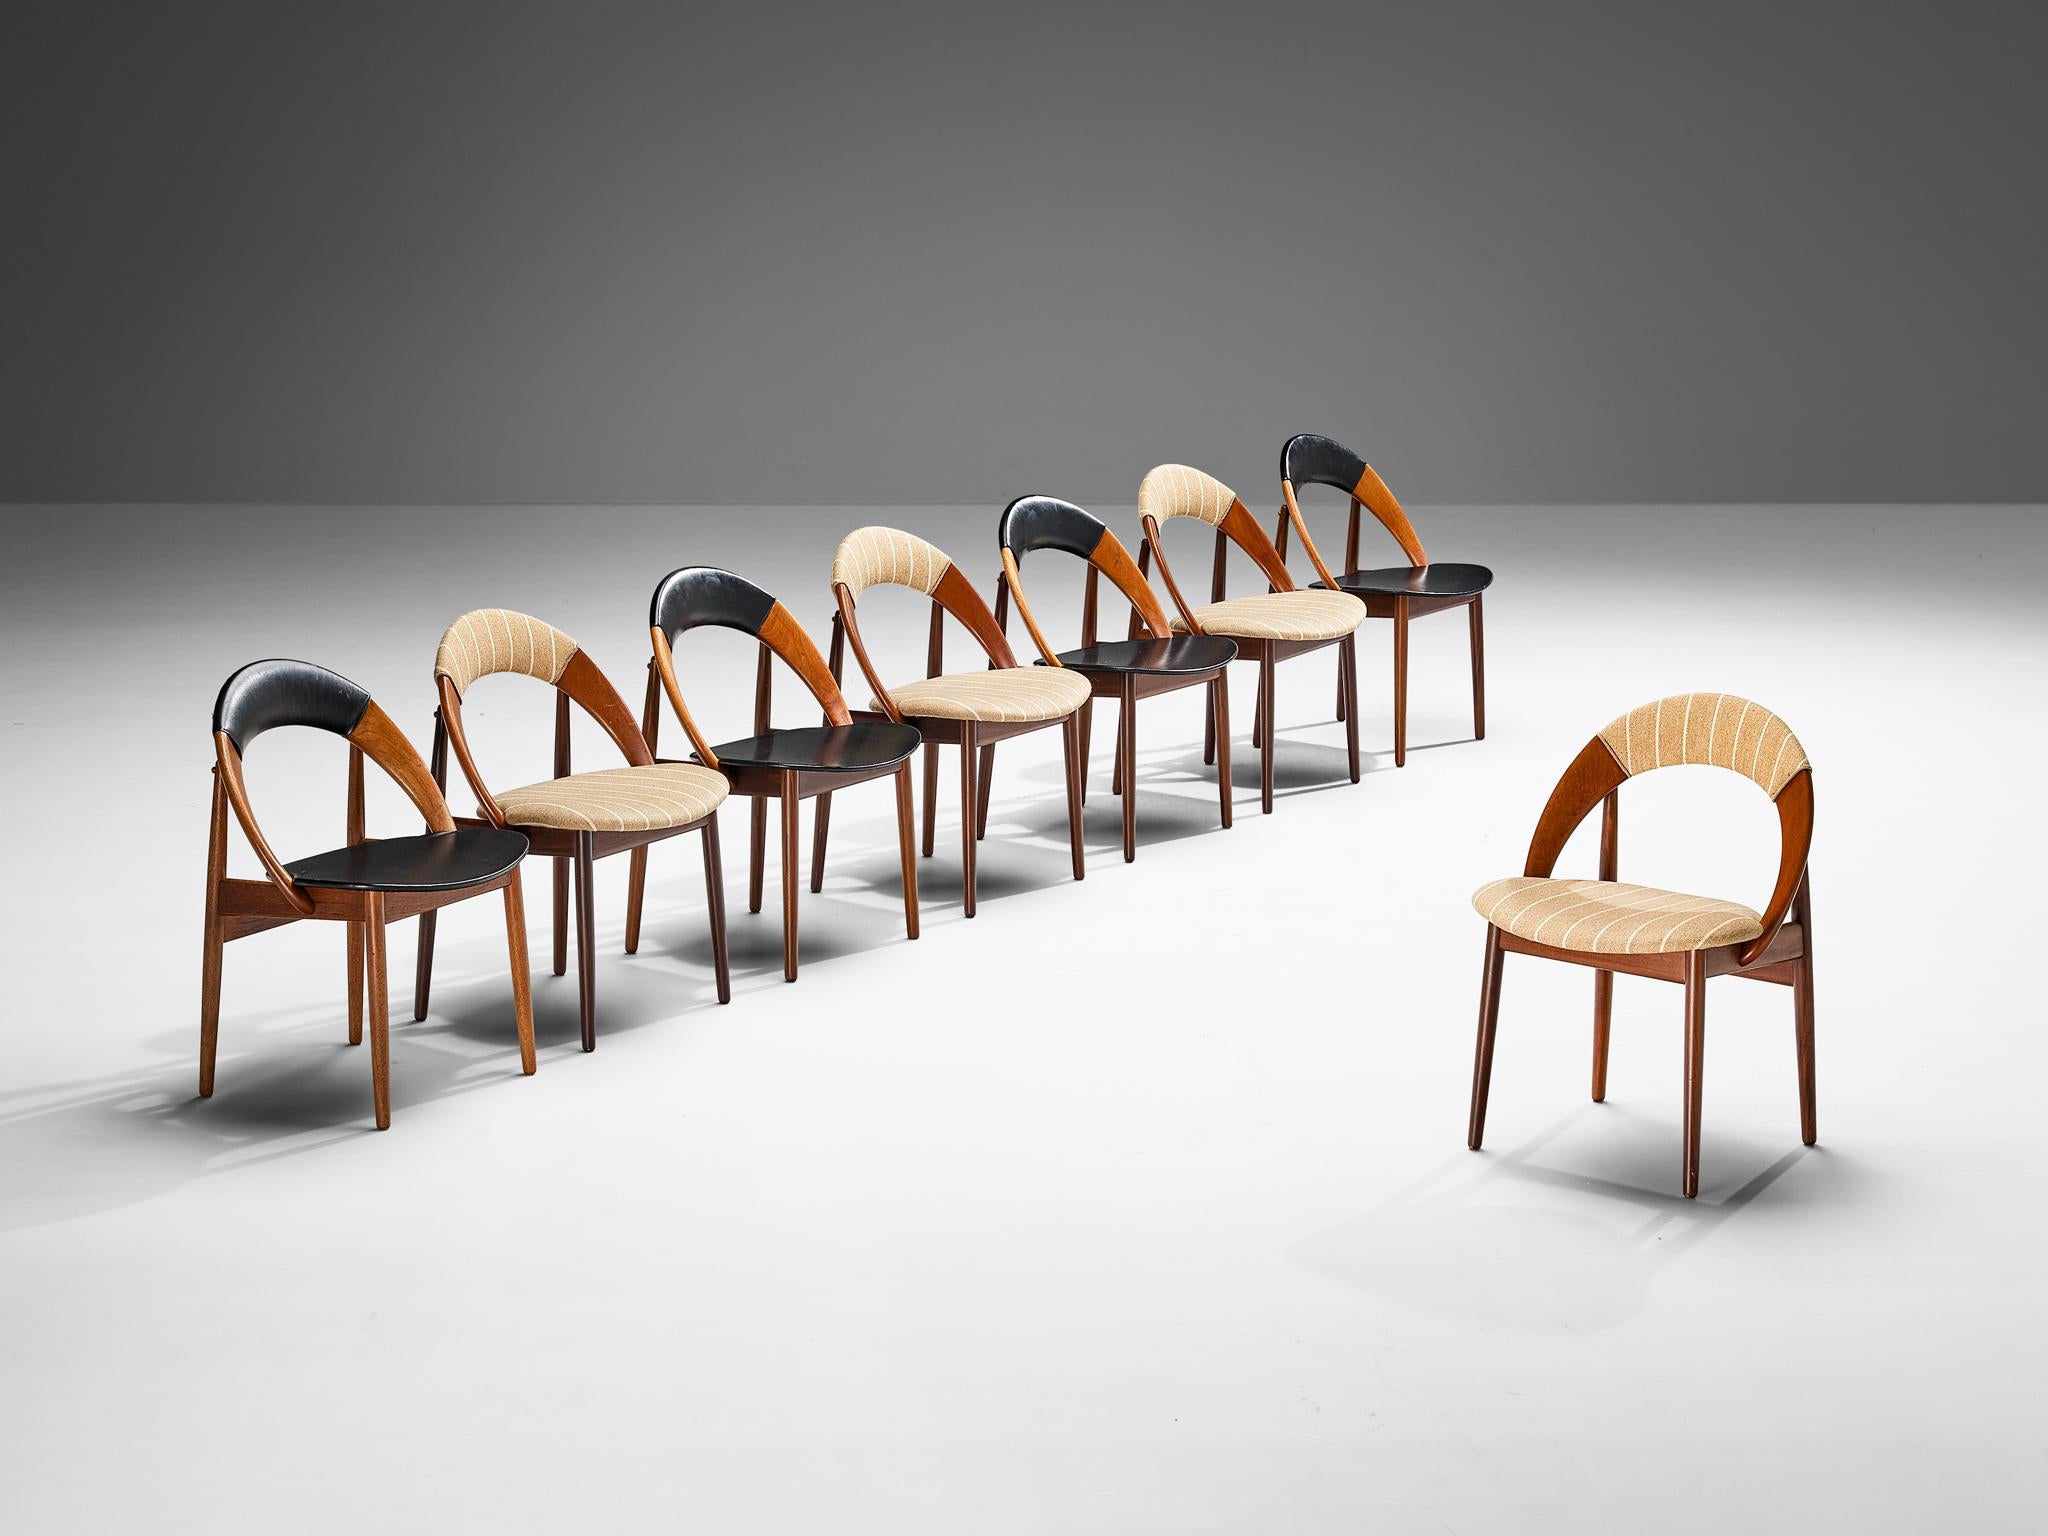 Arne Hovmand-Olsen, set of eight dining chairs, teak, fabric, leatherette, Denmark, 1960s 

Set of eight dining chairs designed by the Danish designer Arne Hovmand-Olsen. The chairs have a very simple and organic design. The rounded back turns into